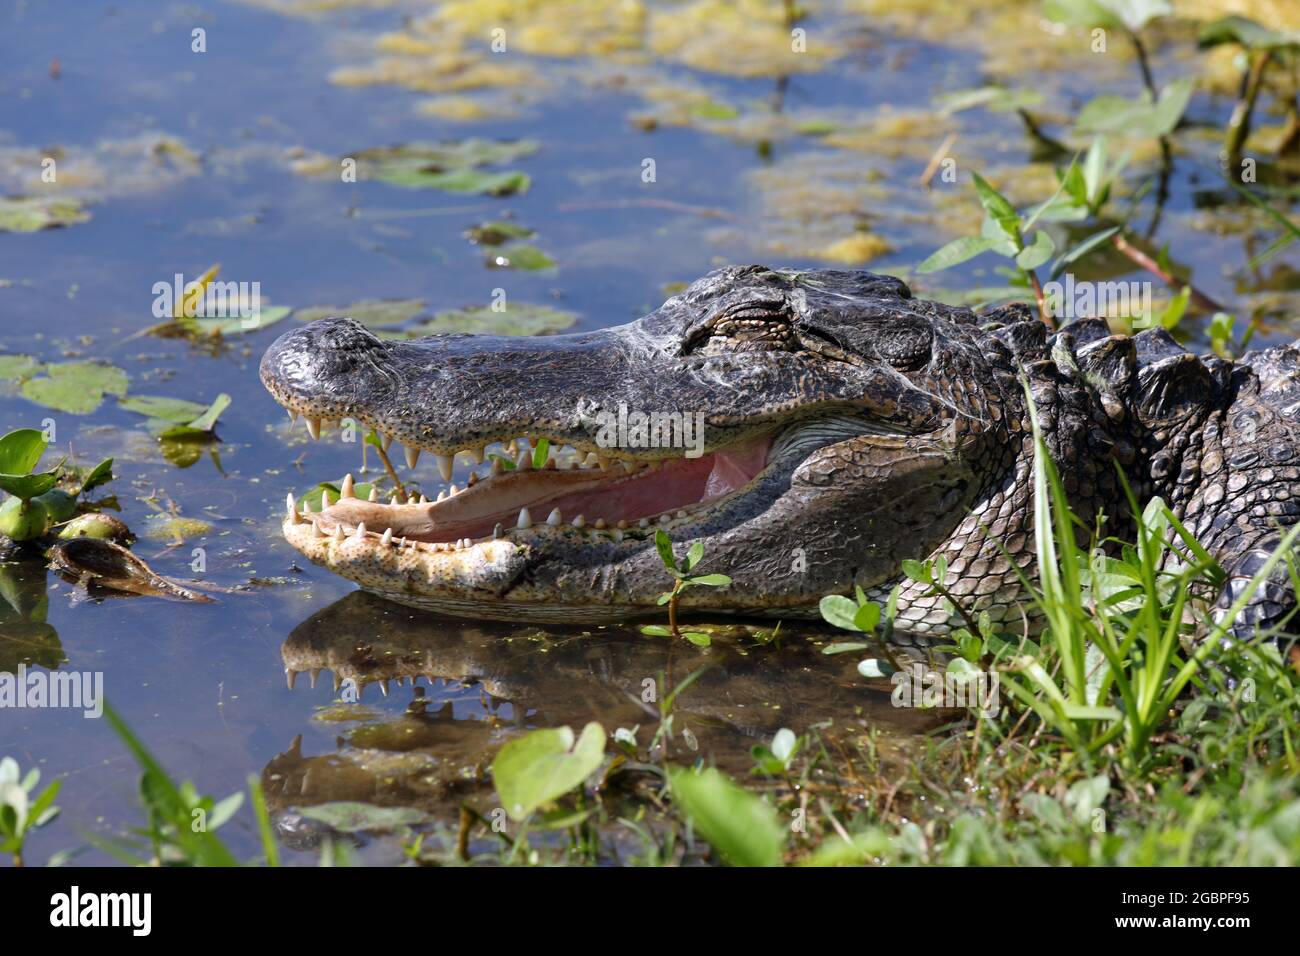 zoology / animals, reptile, Alligatoridae, American Alligator (Alligator mississippiensis), ADDITIONAL-RIGHTS-CLEARANCE-INFO-NOT-AVAILABLE Stock Photo